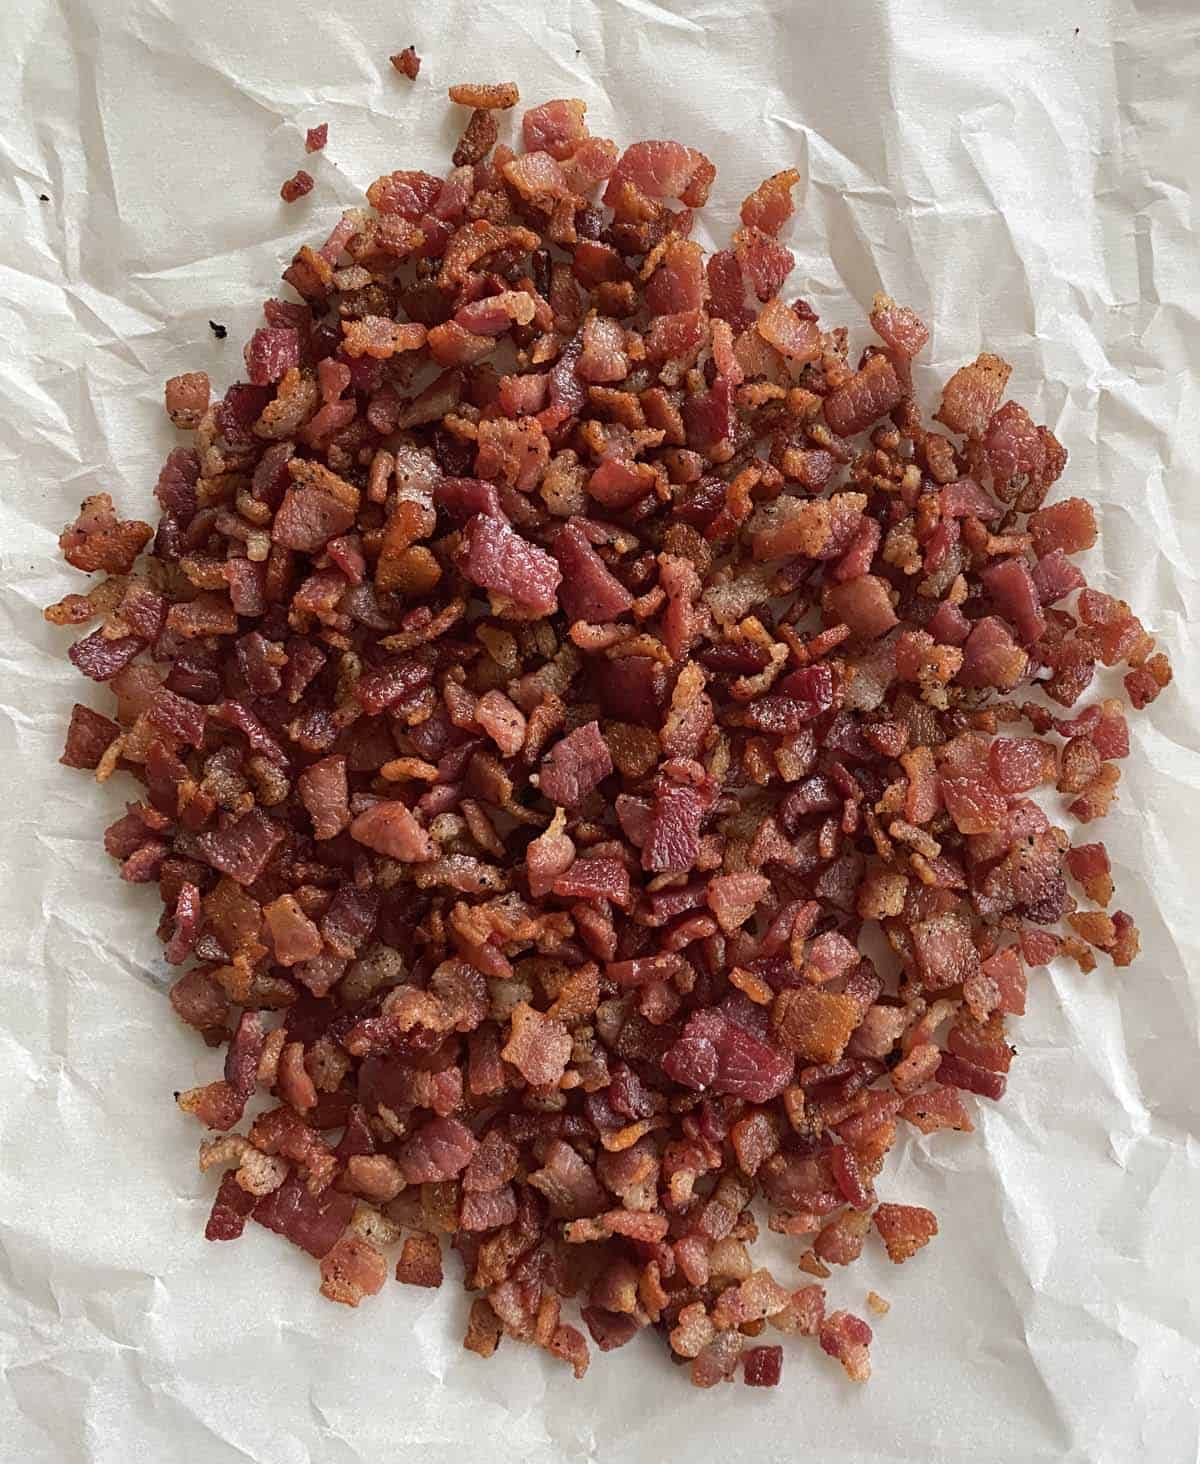 A pile of freshly cooked bacon bits on a piece of parchment paper.